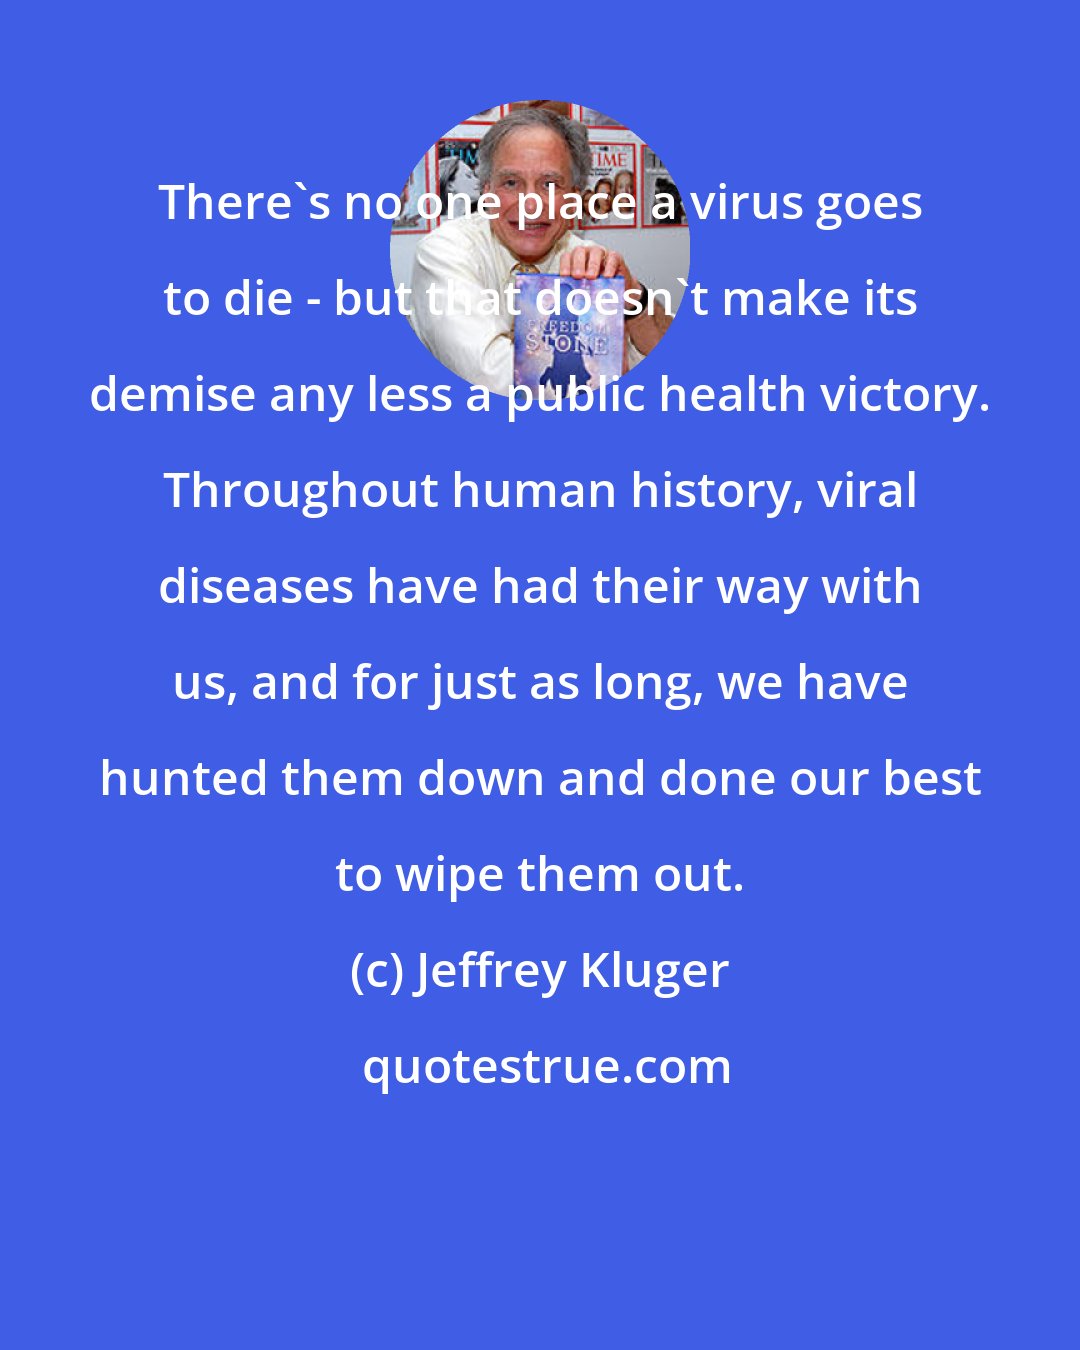 Jeffrey Kluger: There's no one place a virus goes to die - but that doesn't make its demise any less a public health victory. Throughout human history, viral diseases have had their way with us, and for just as long, we have hunted them down and done our best to wipe them out.